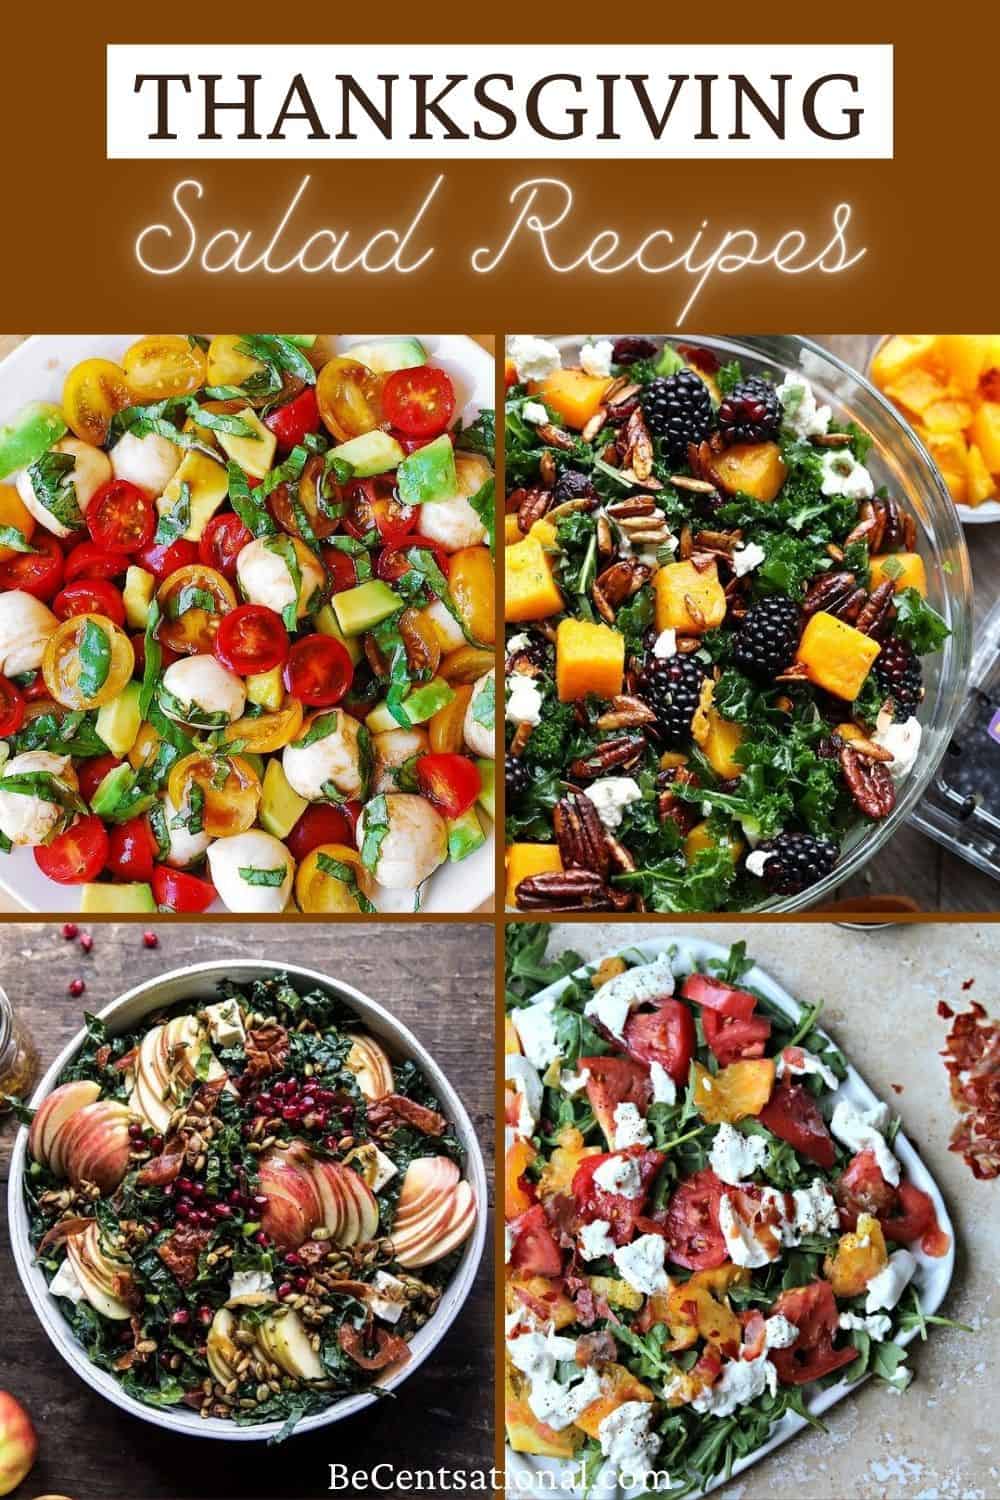 easy thanksgiving salad recipes . showcasing a Caprese salad with proscuitto, oneycrisp Apple and Kale Salad, Roasted Butternut Squash Blackberry Salad and a tomato basic avocado mozzarella salad.